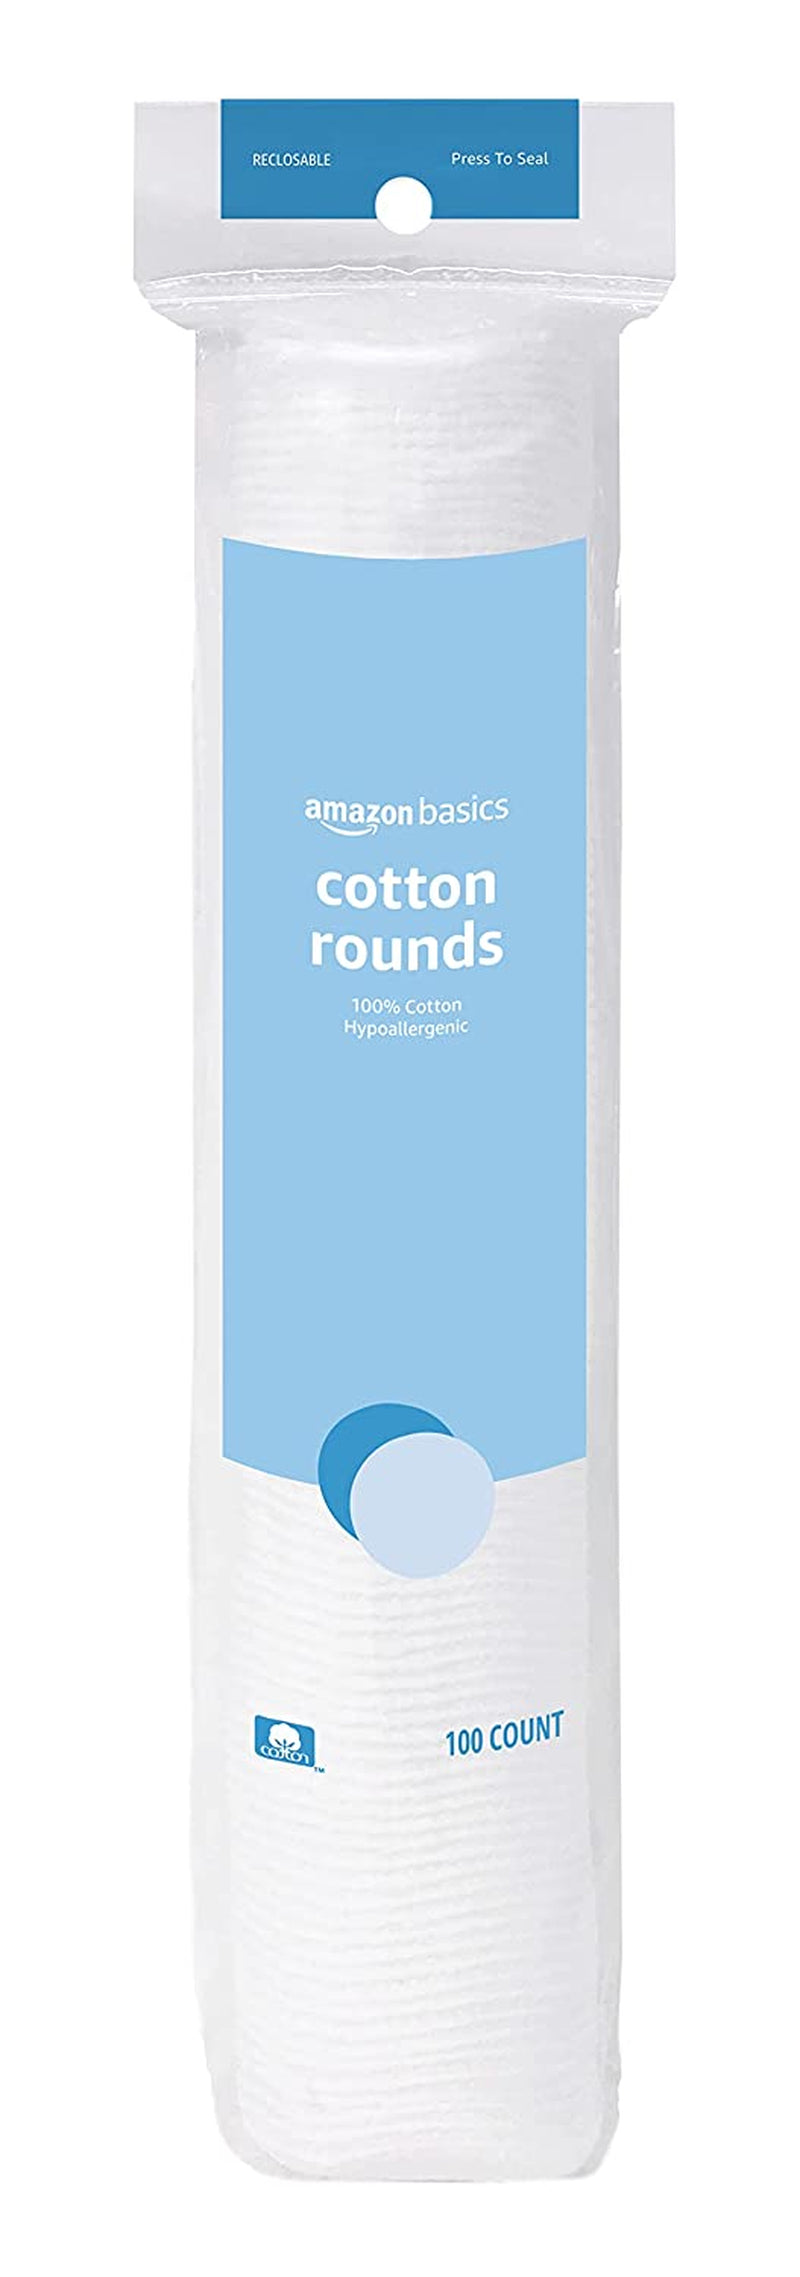 Hypoallergenic 100% Cotton Rounds, 100 Count